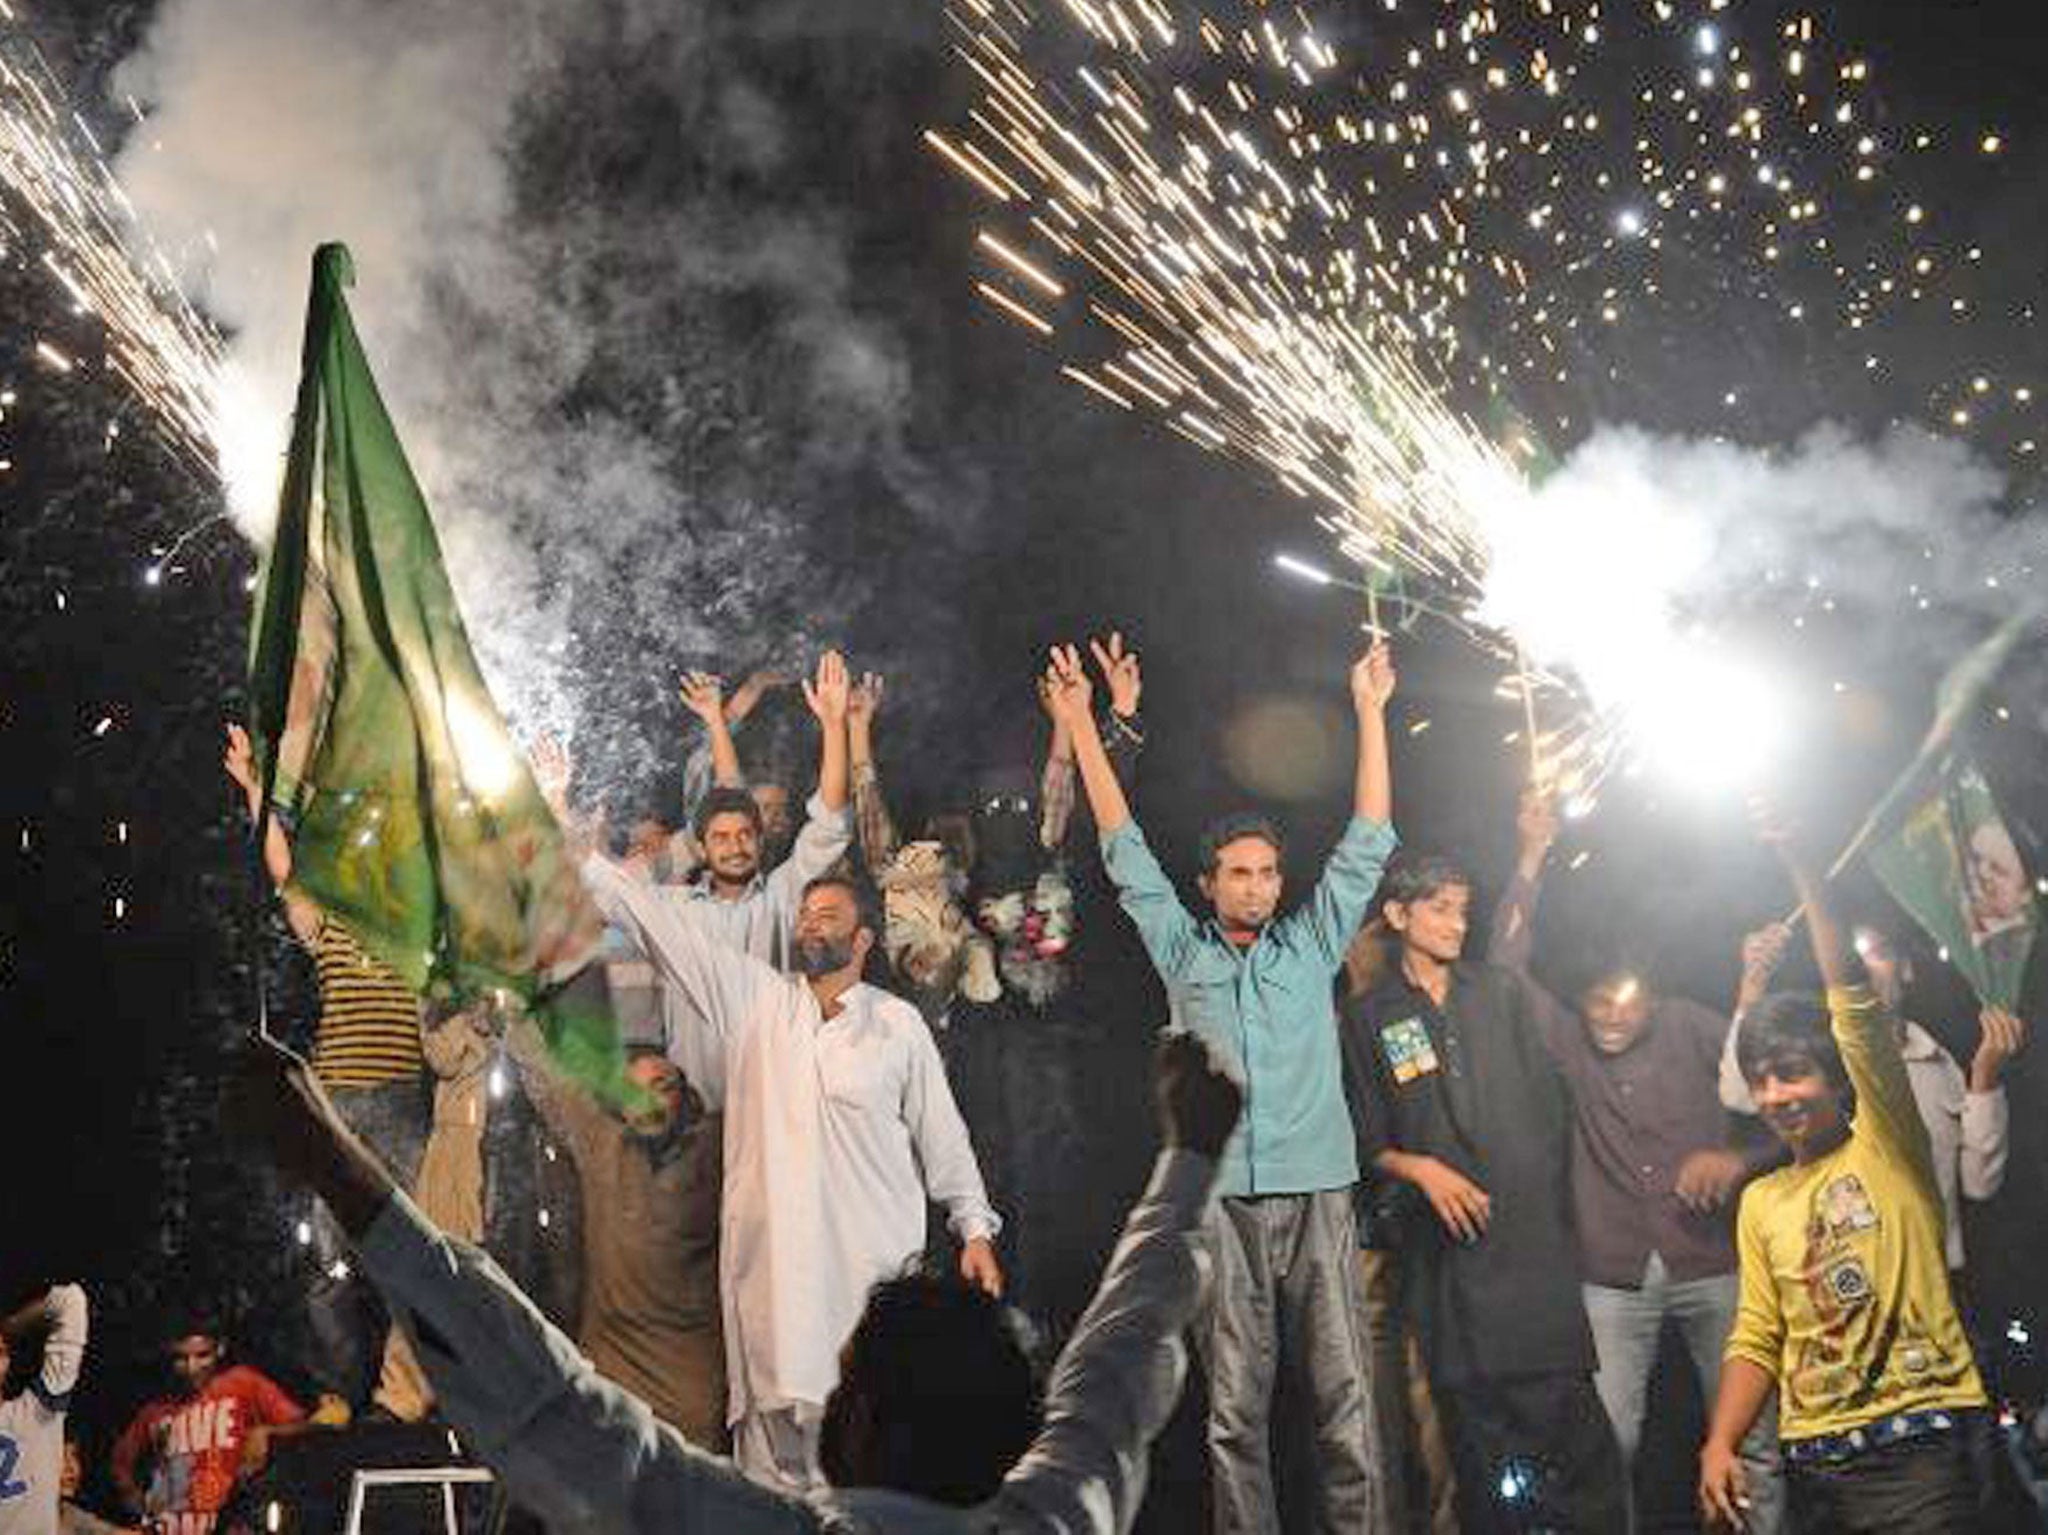 Supporters of former Pakistani Prime Minister and head of the Pakistan Muslim League-N (PML-N), Nawaz Sharif, celebrate with fireworks the victory of their party a day after landmark general elections, in Lahore